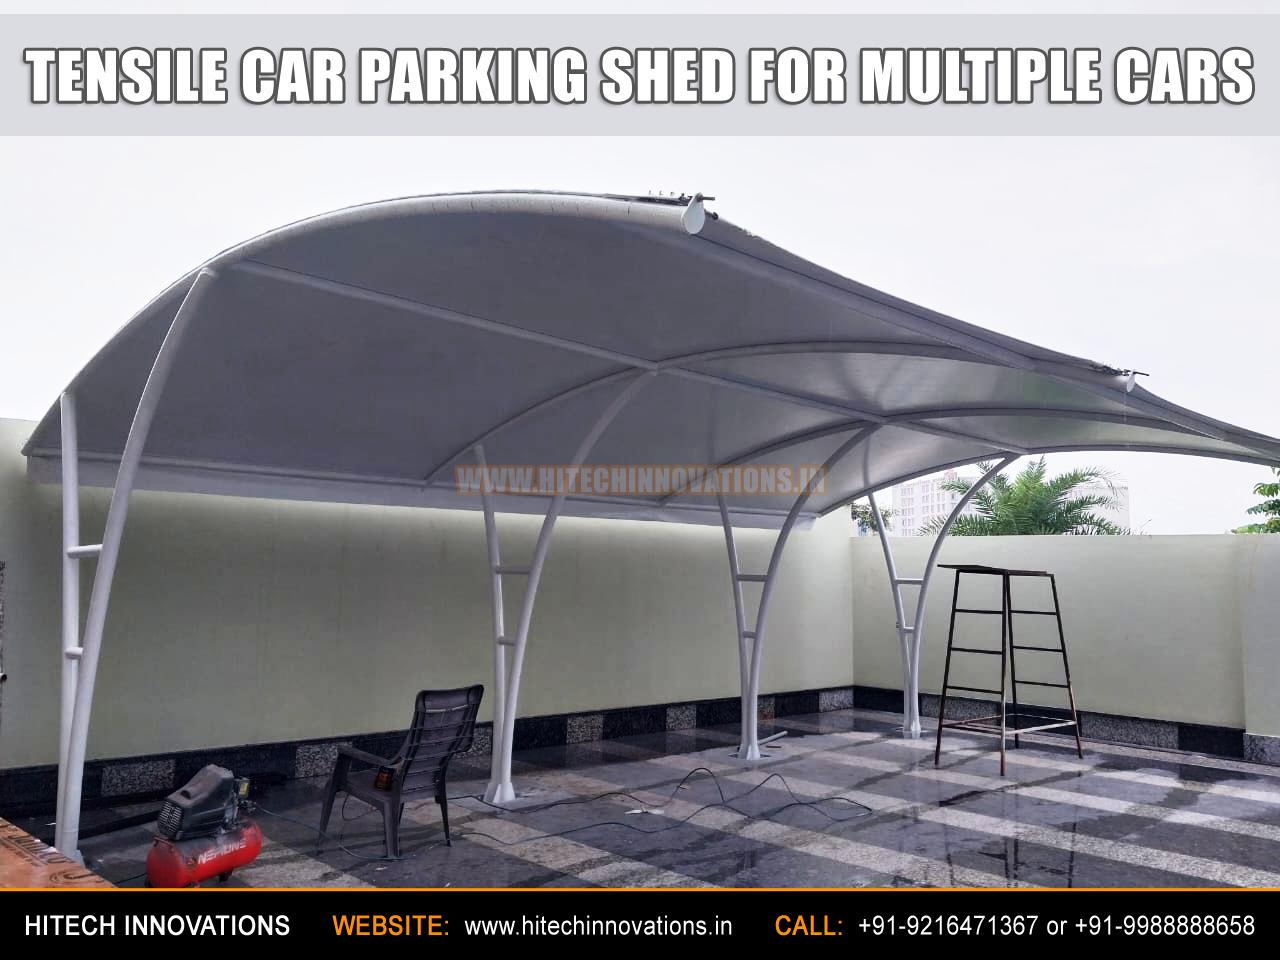 Beautiful View of Car Parking Shed